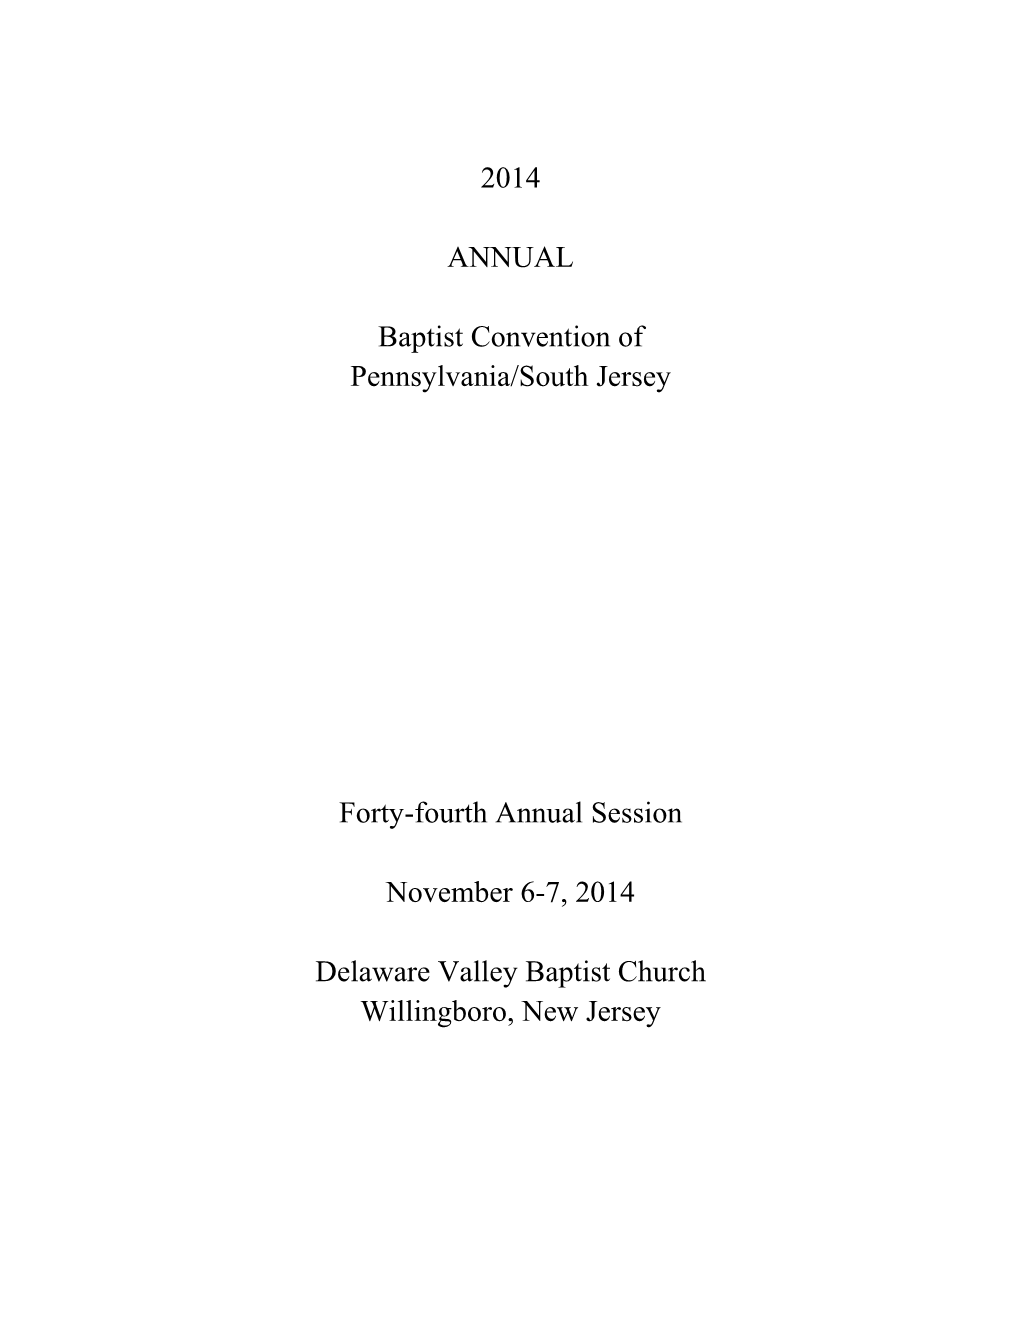 2014 ANNUAL Baptist Convention of Pennsylvania/South Jersey Forty-Fourth Annual Session November 6-7, 2014 Delaware Valley Bapti